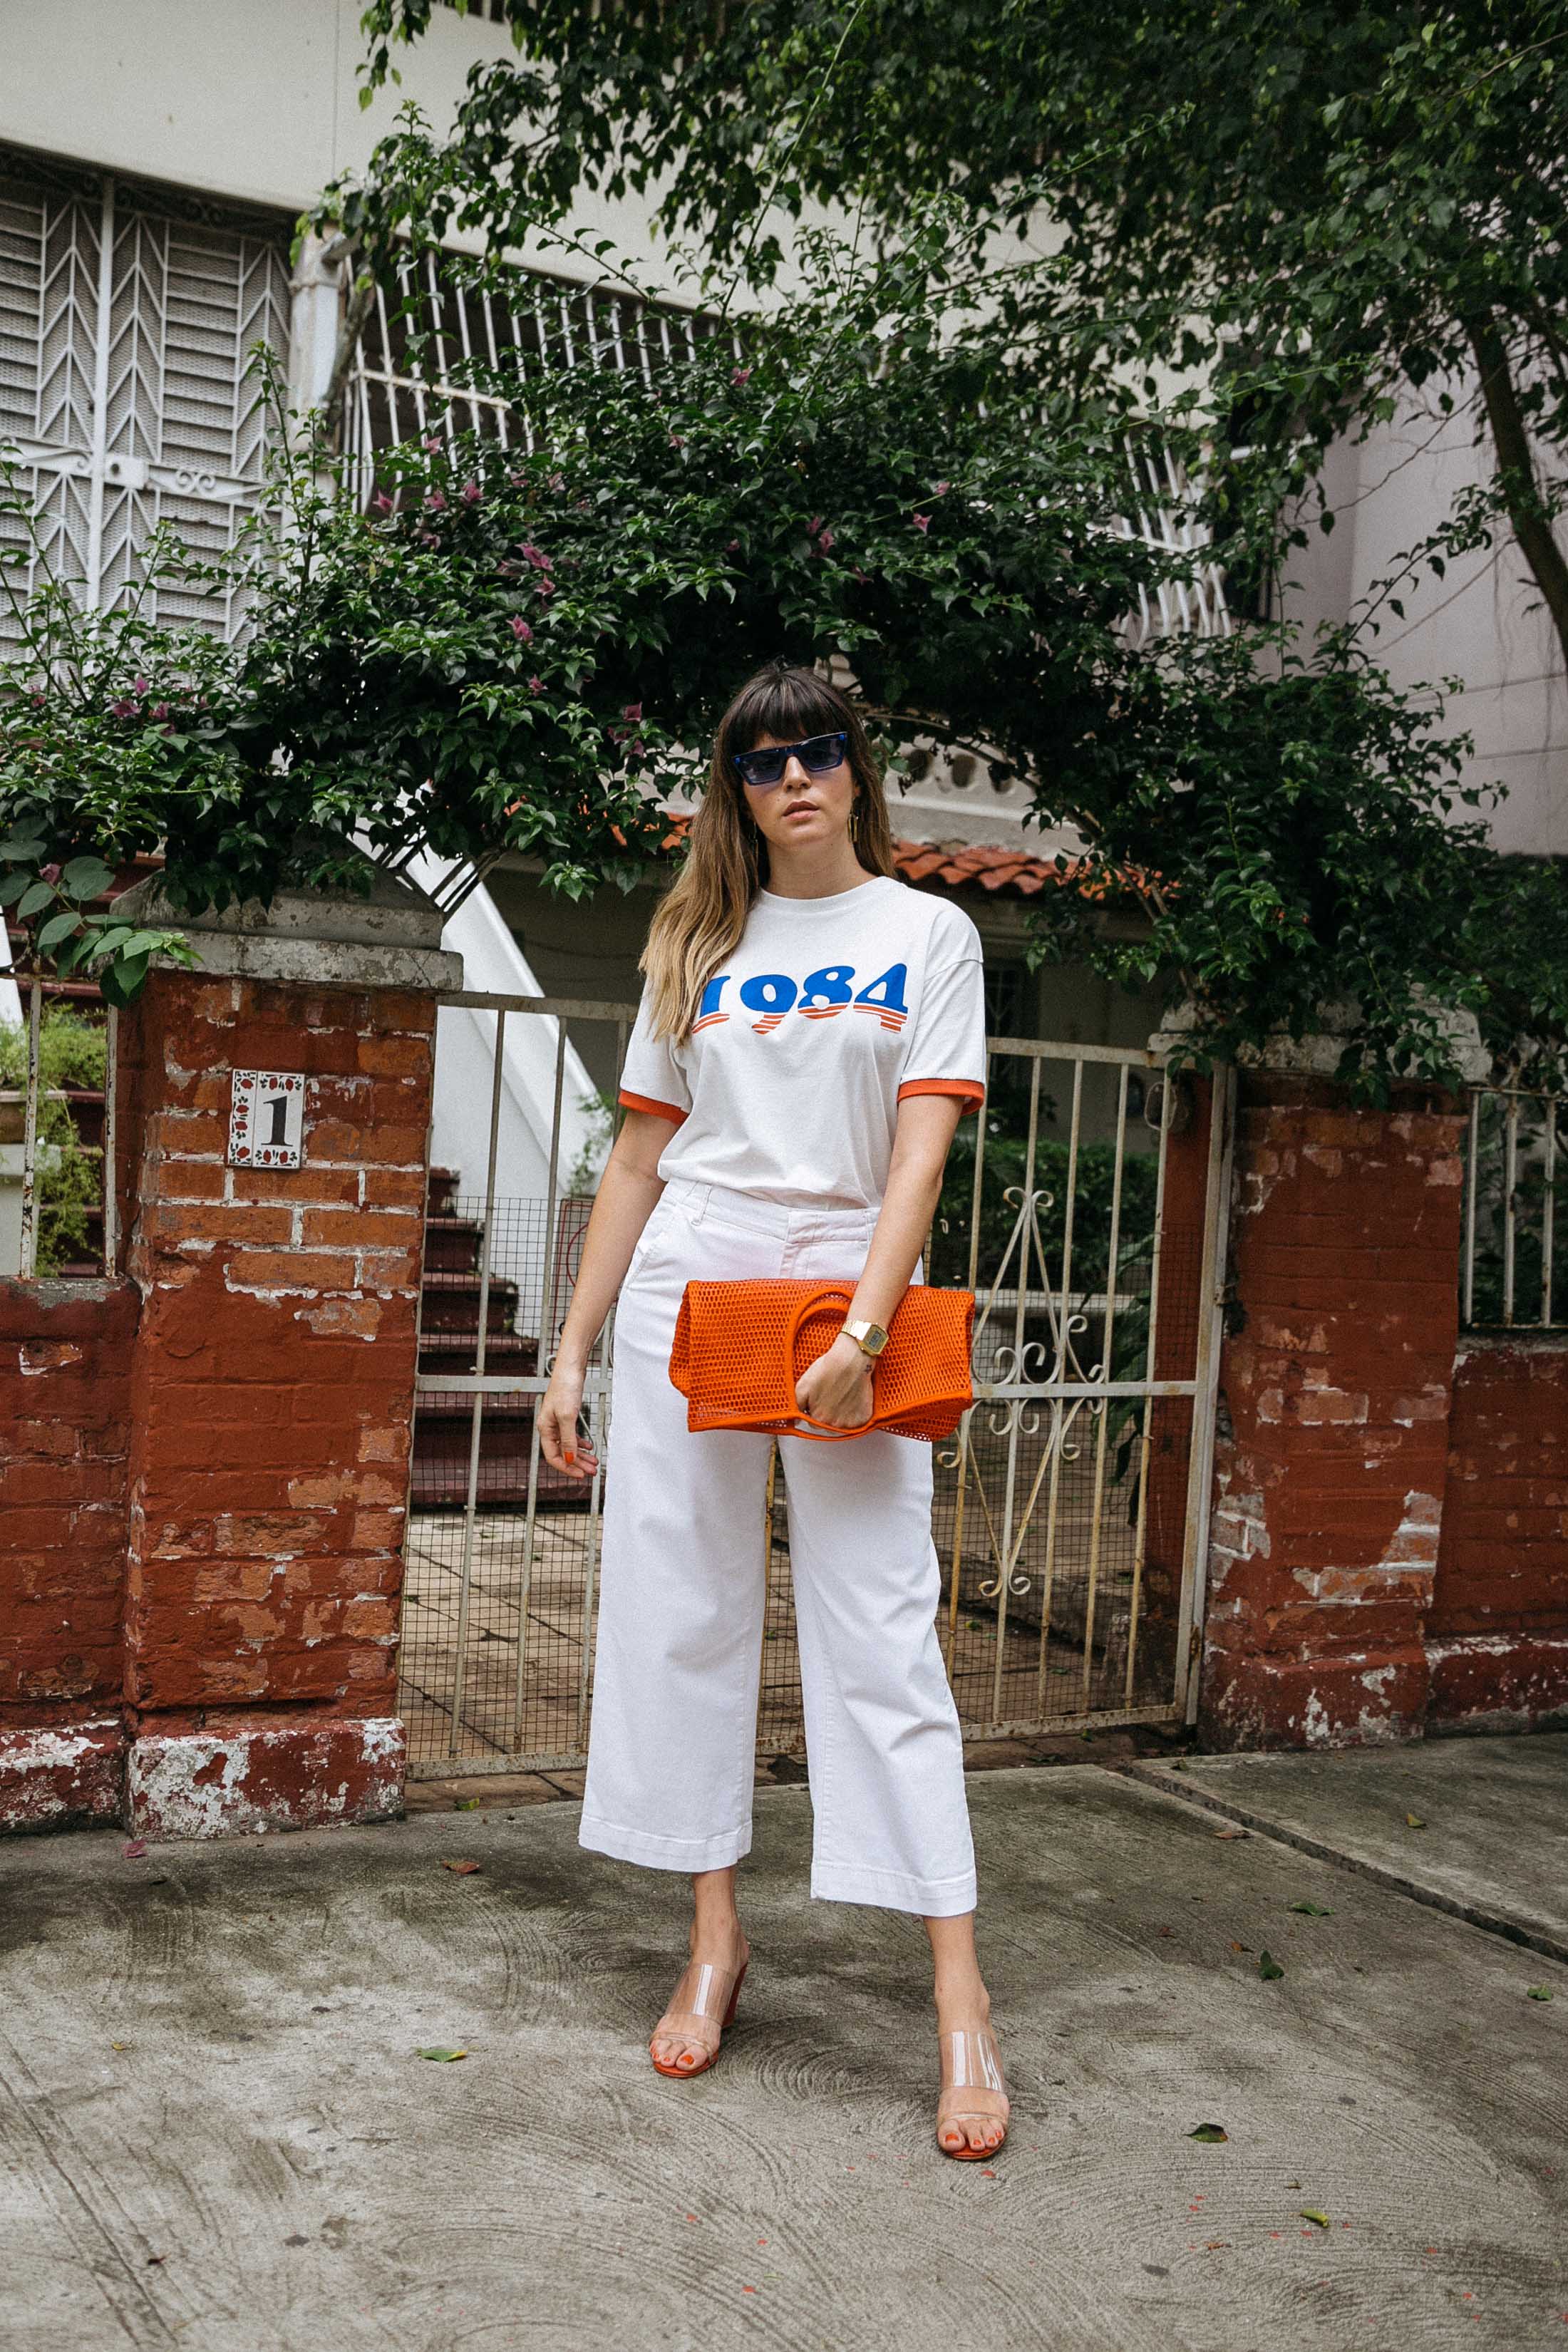 Maristella wears a 1984 t-shirt from Mango, wide leg jeans from Zara and COS net bag